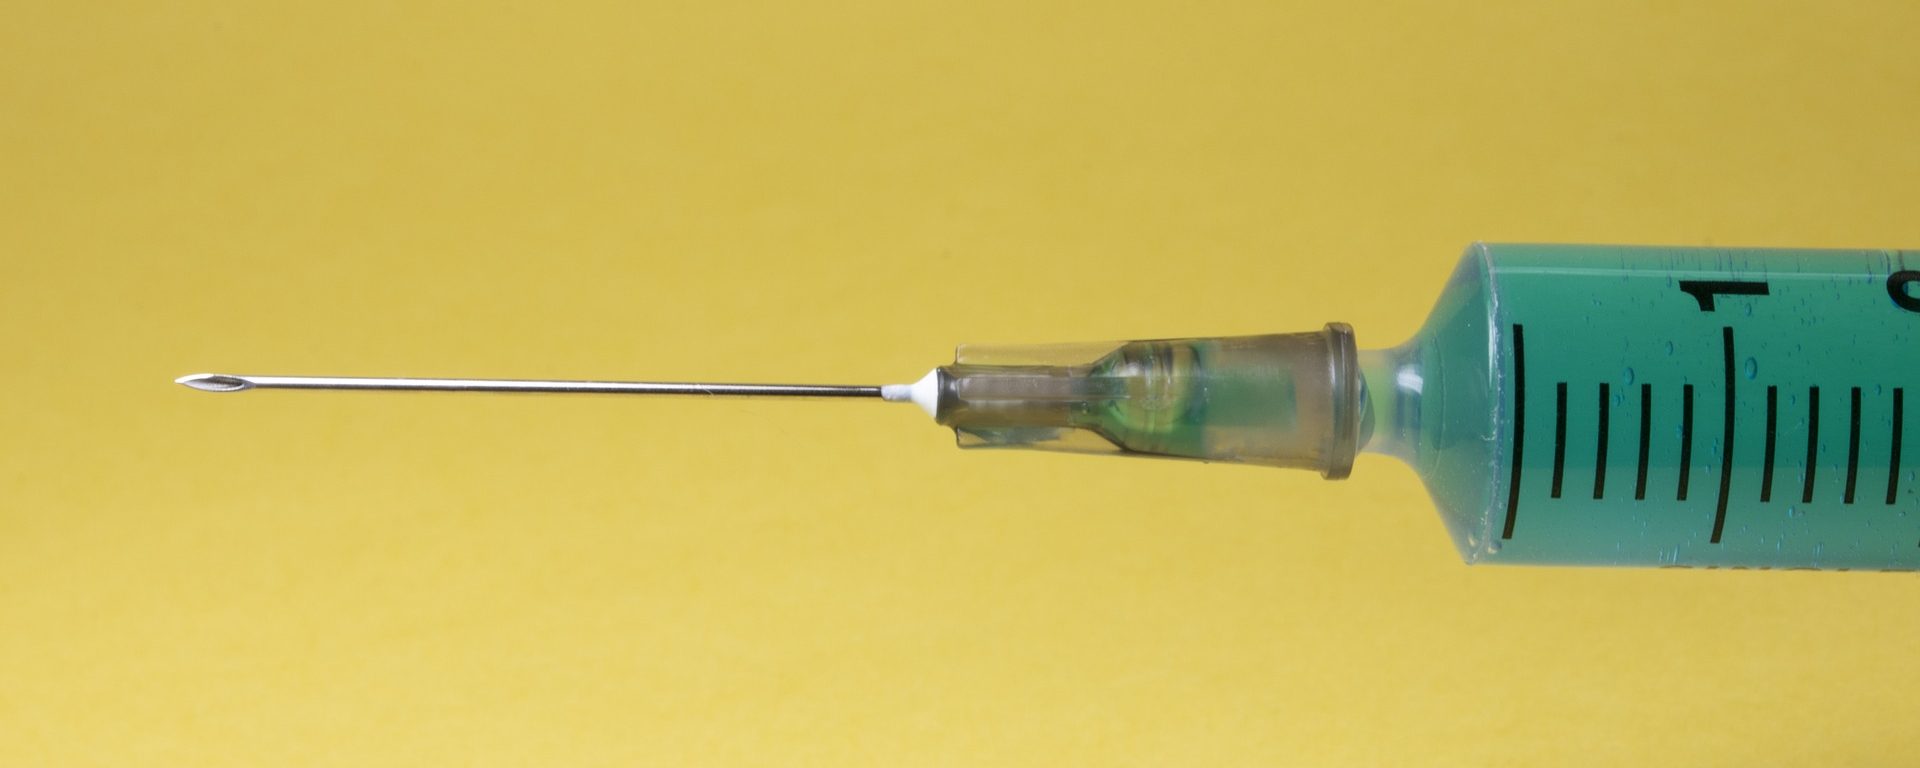 Perfecting the Rabies Vaccine Formula